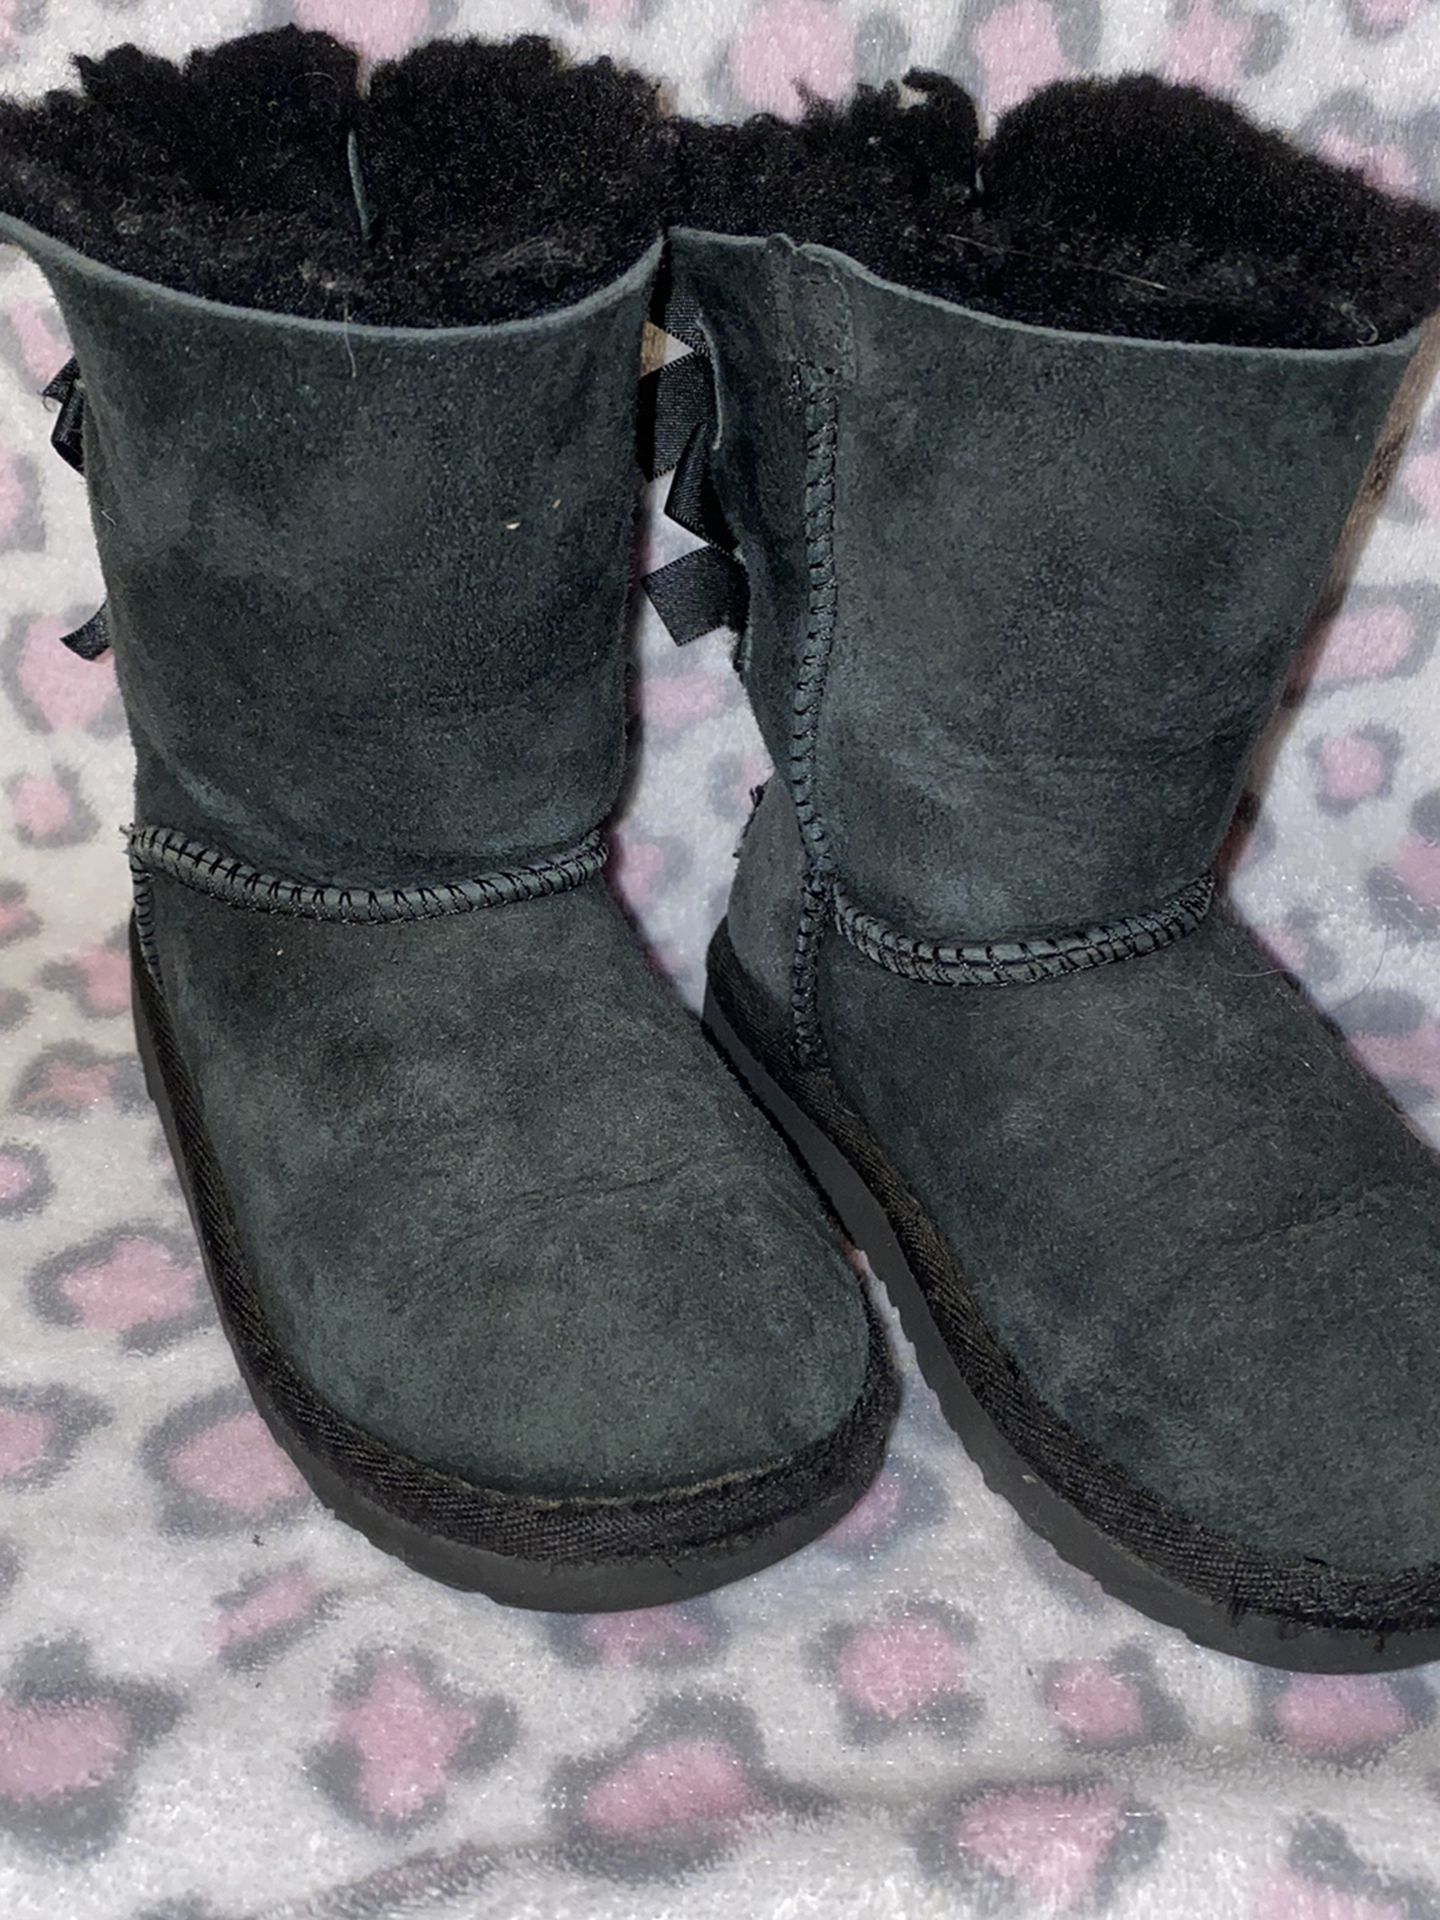 Size 9c Ugg’s Black Boots